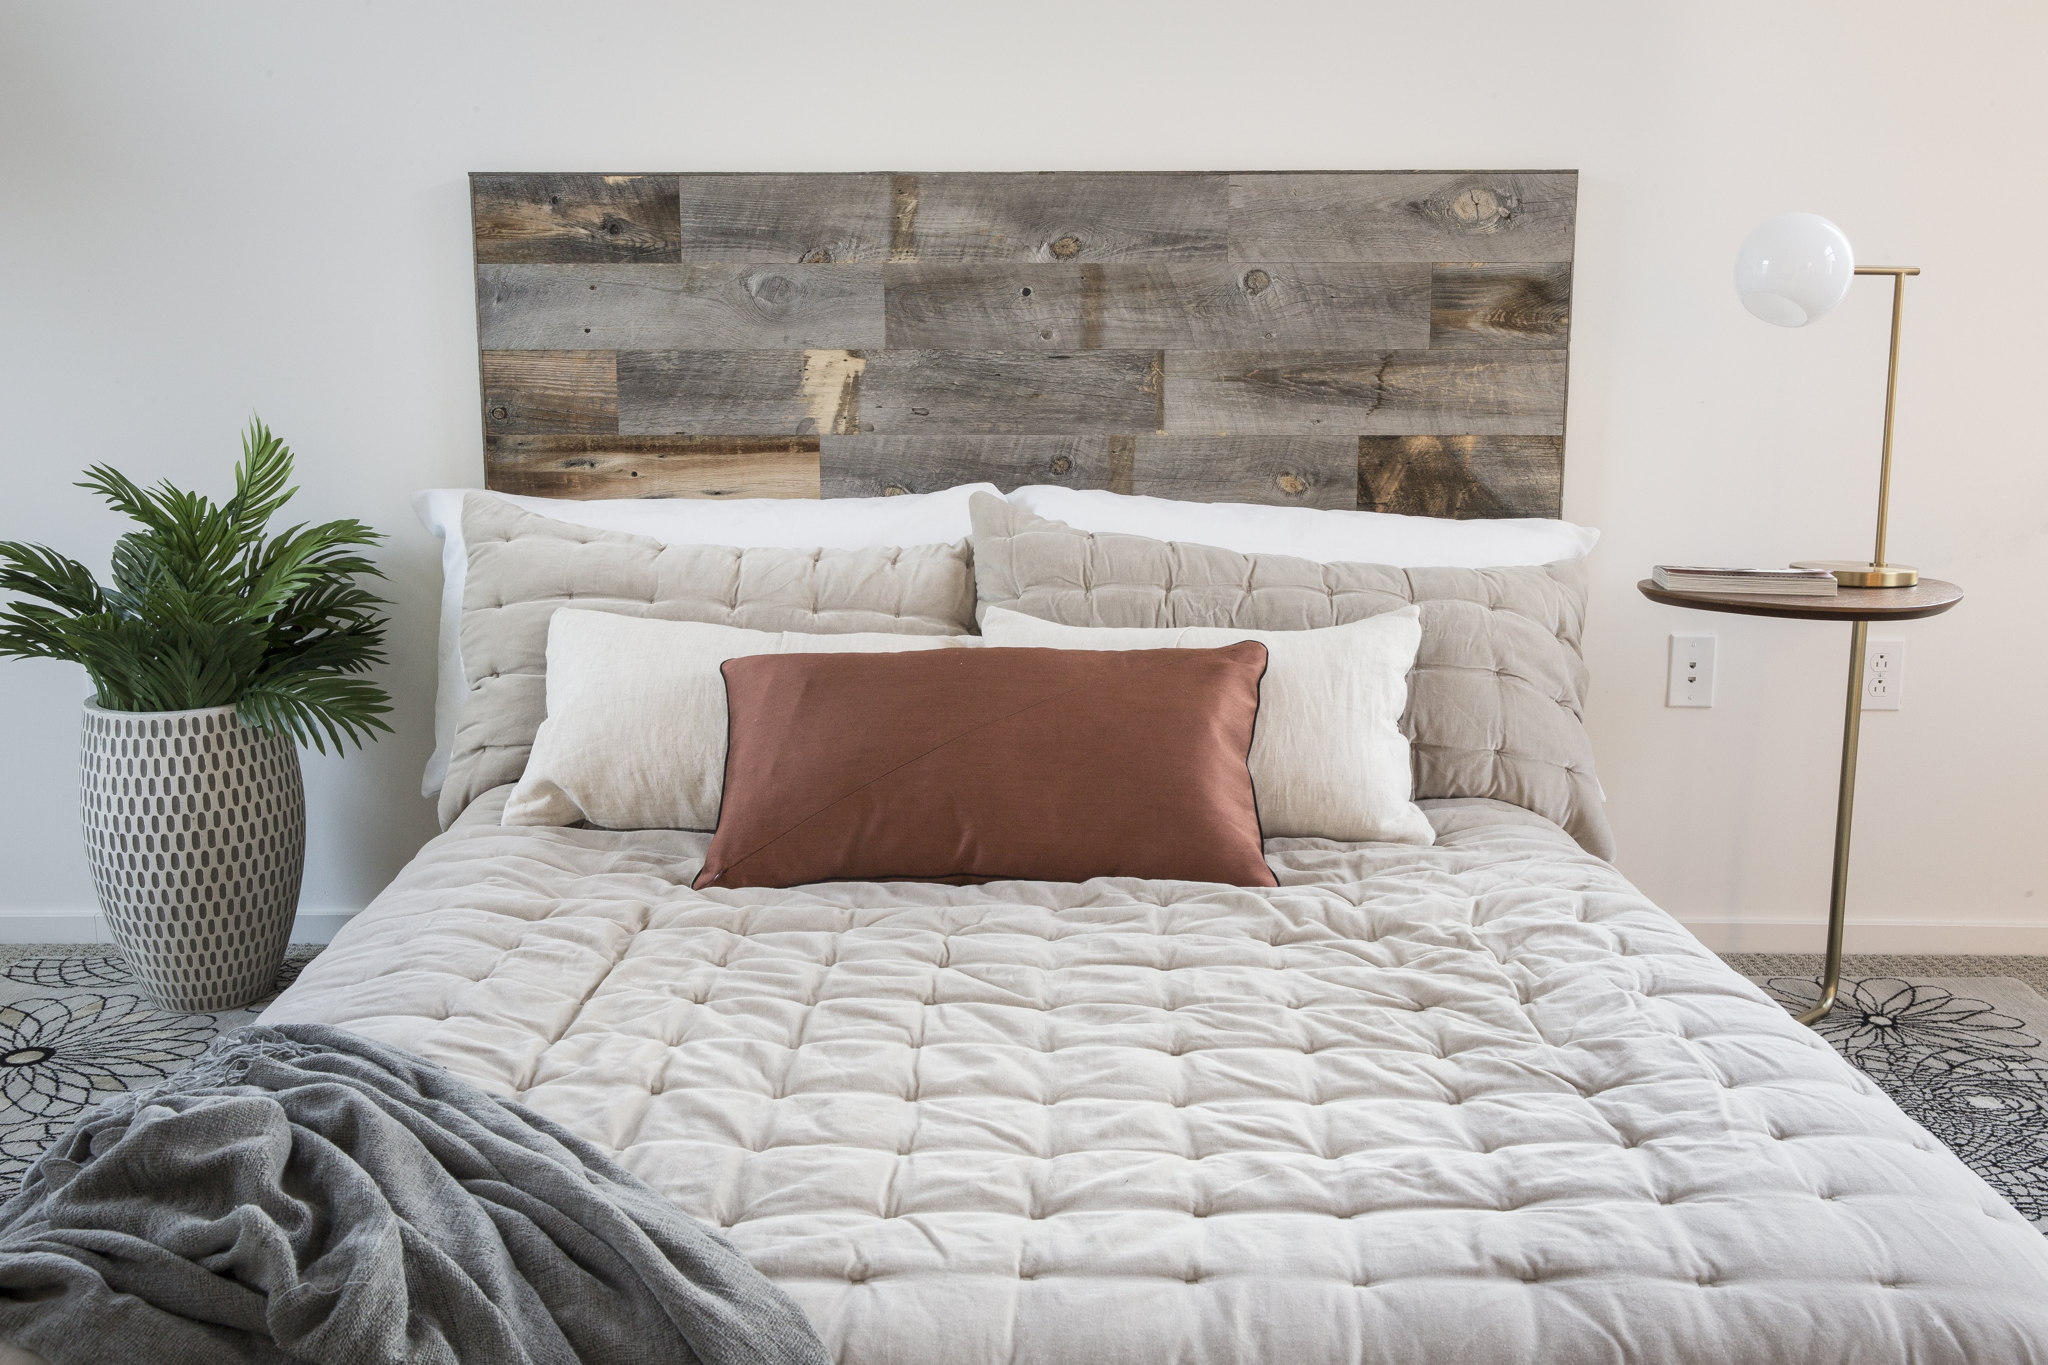 Stikit Reclaimed Weathered Wood Panel, Grey Rustic Wood Headboard Queen Size